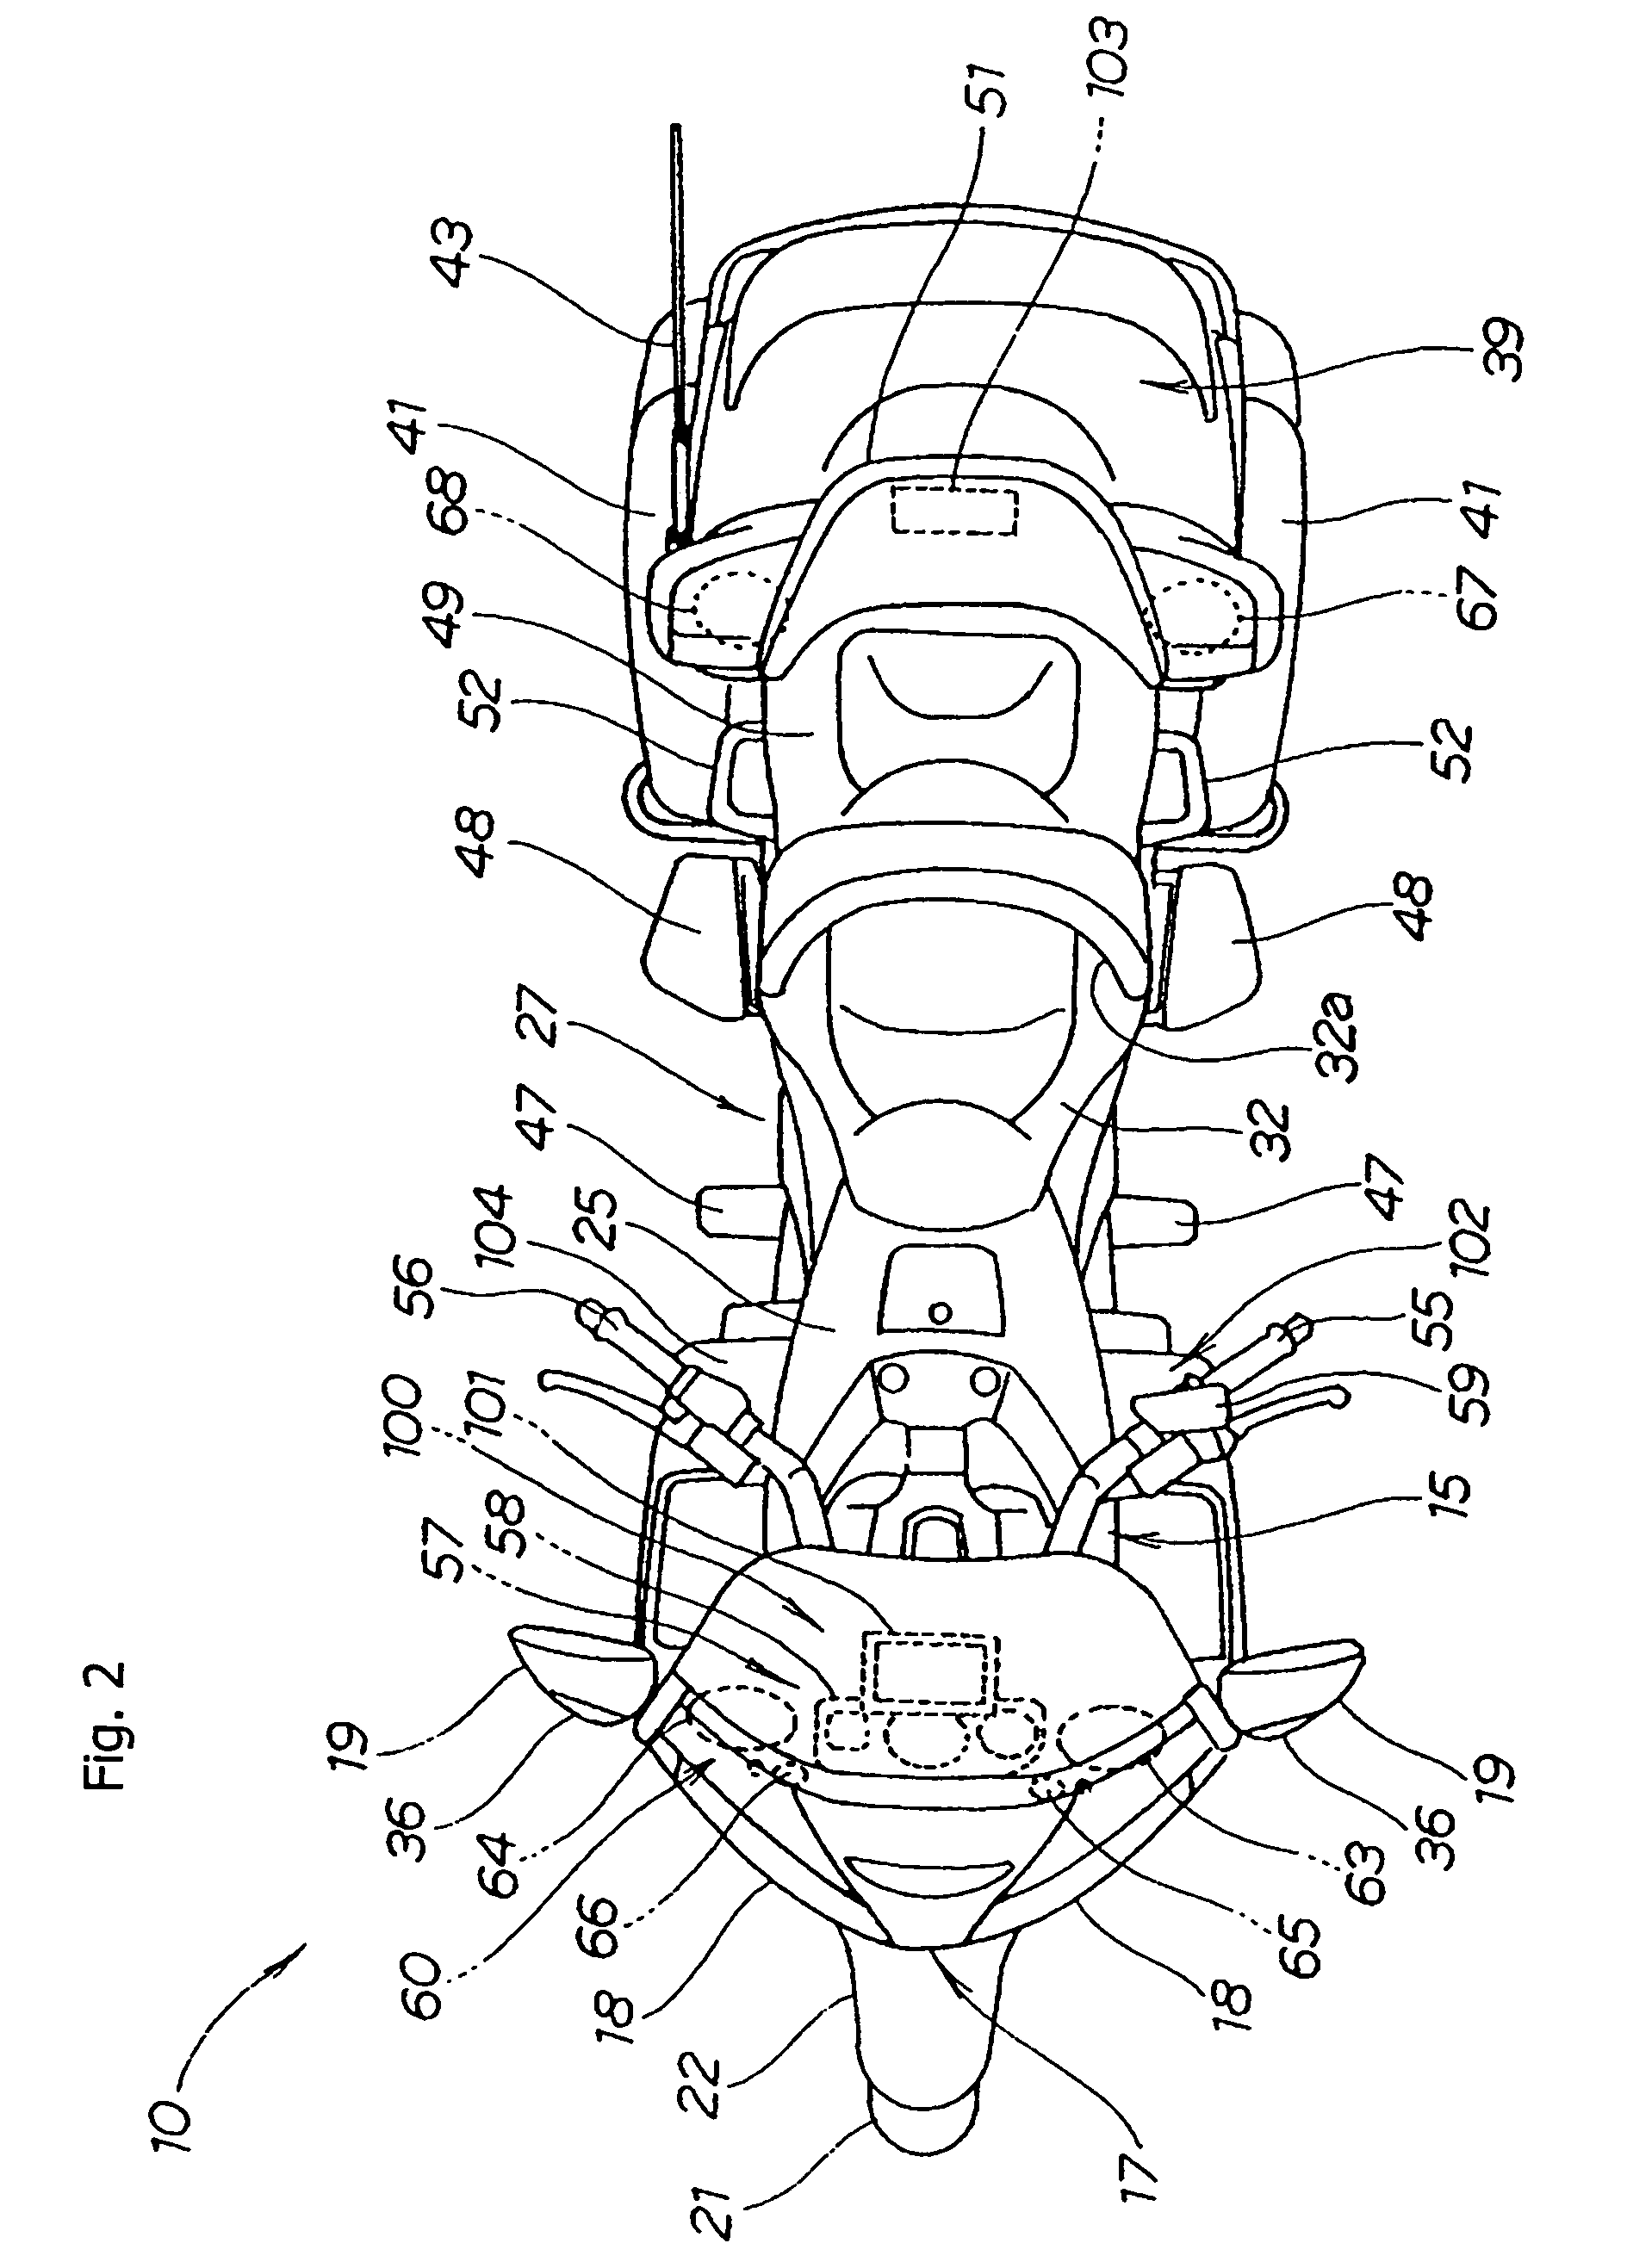 Electrically heated seat apparatus for a vehicle, vehicle incorporating same, and method of using same